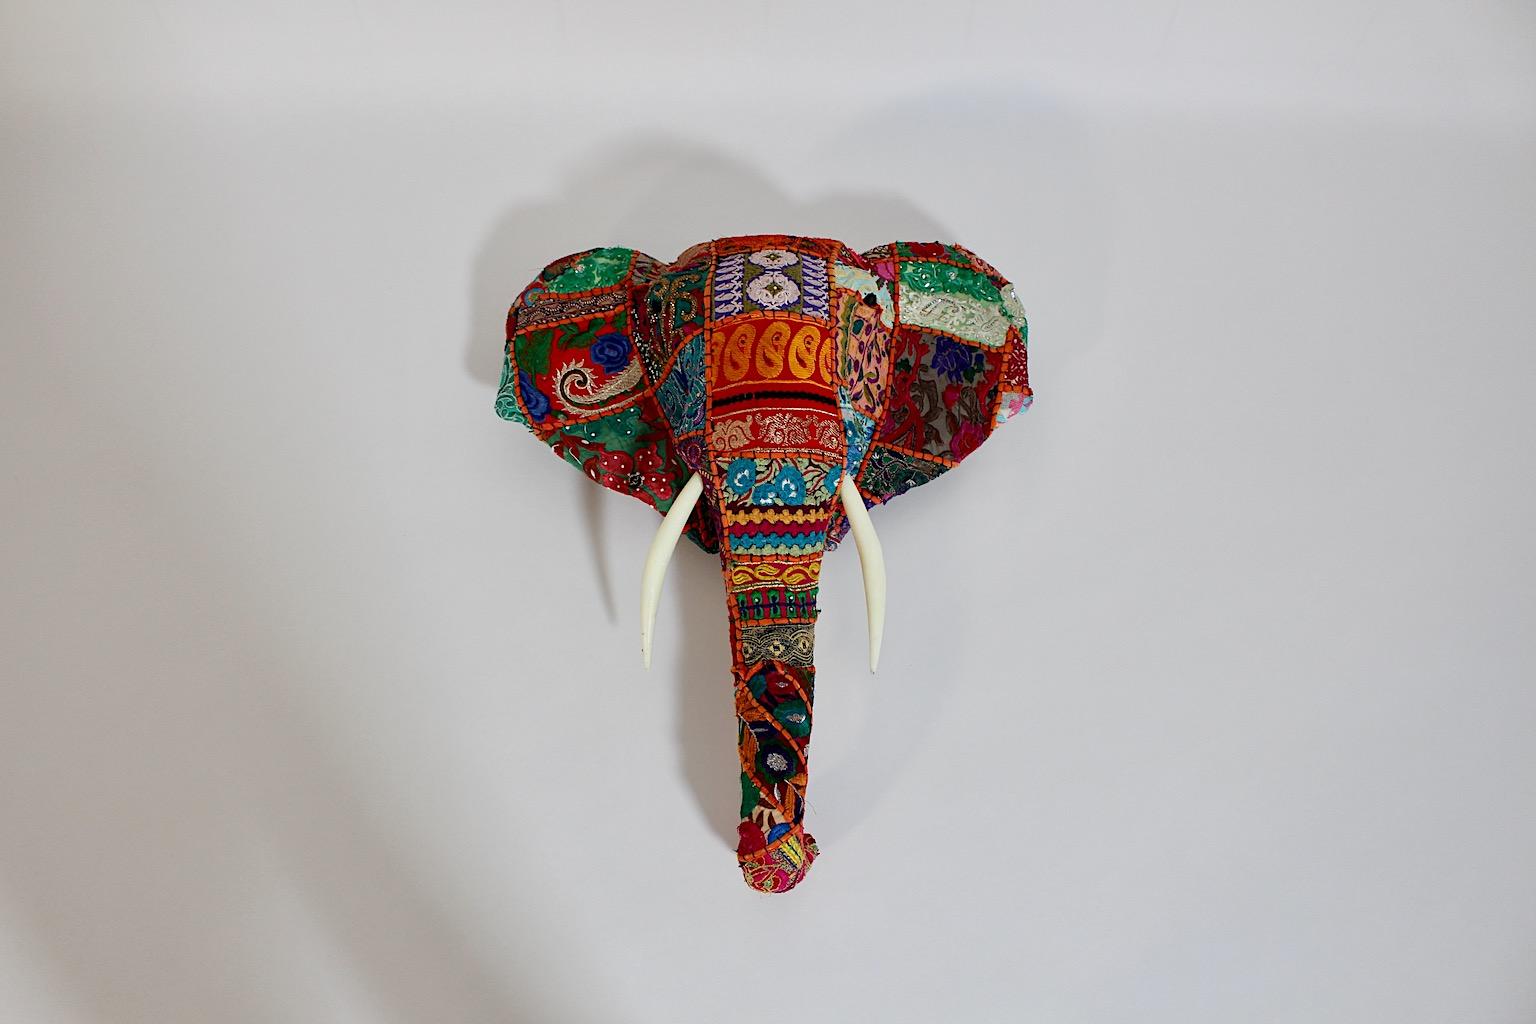 Animal Vintage Folk Art hand made fabric embroidery wall mounted elephant head from vintage sari fabric, circa 1980s India.
An amazing vintage patchwork elephant head like a trophy from wonderful vintage cotton fabric in wonderful light colors with